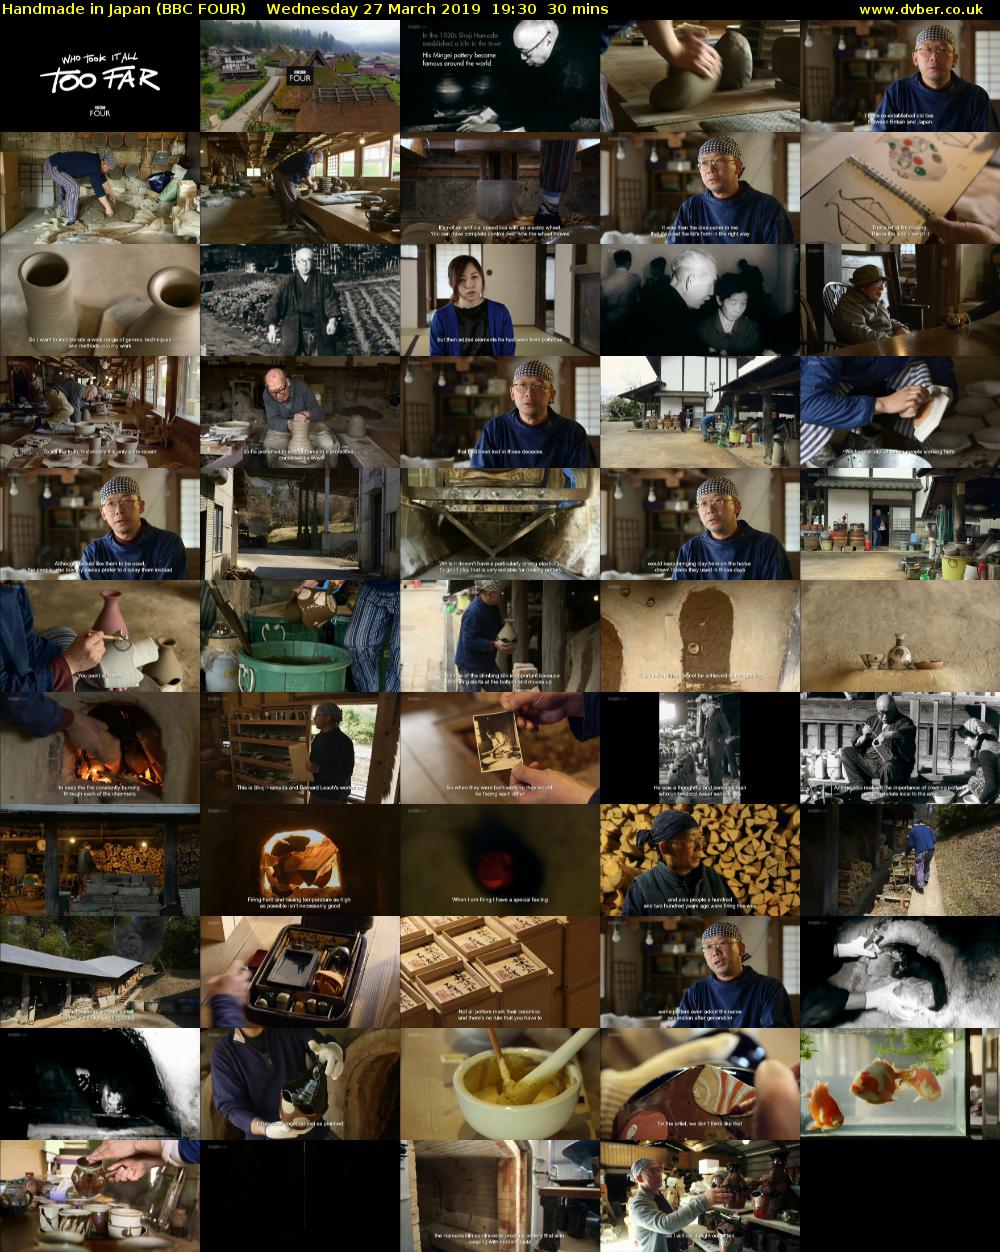 Handmade in Japan (BBC FOUR) Wednesday 27 March 2019 19:30 - 20:00